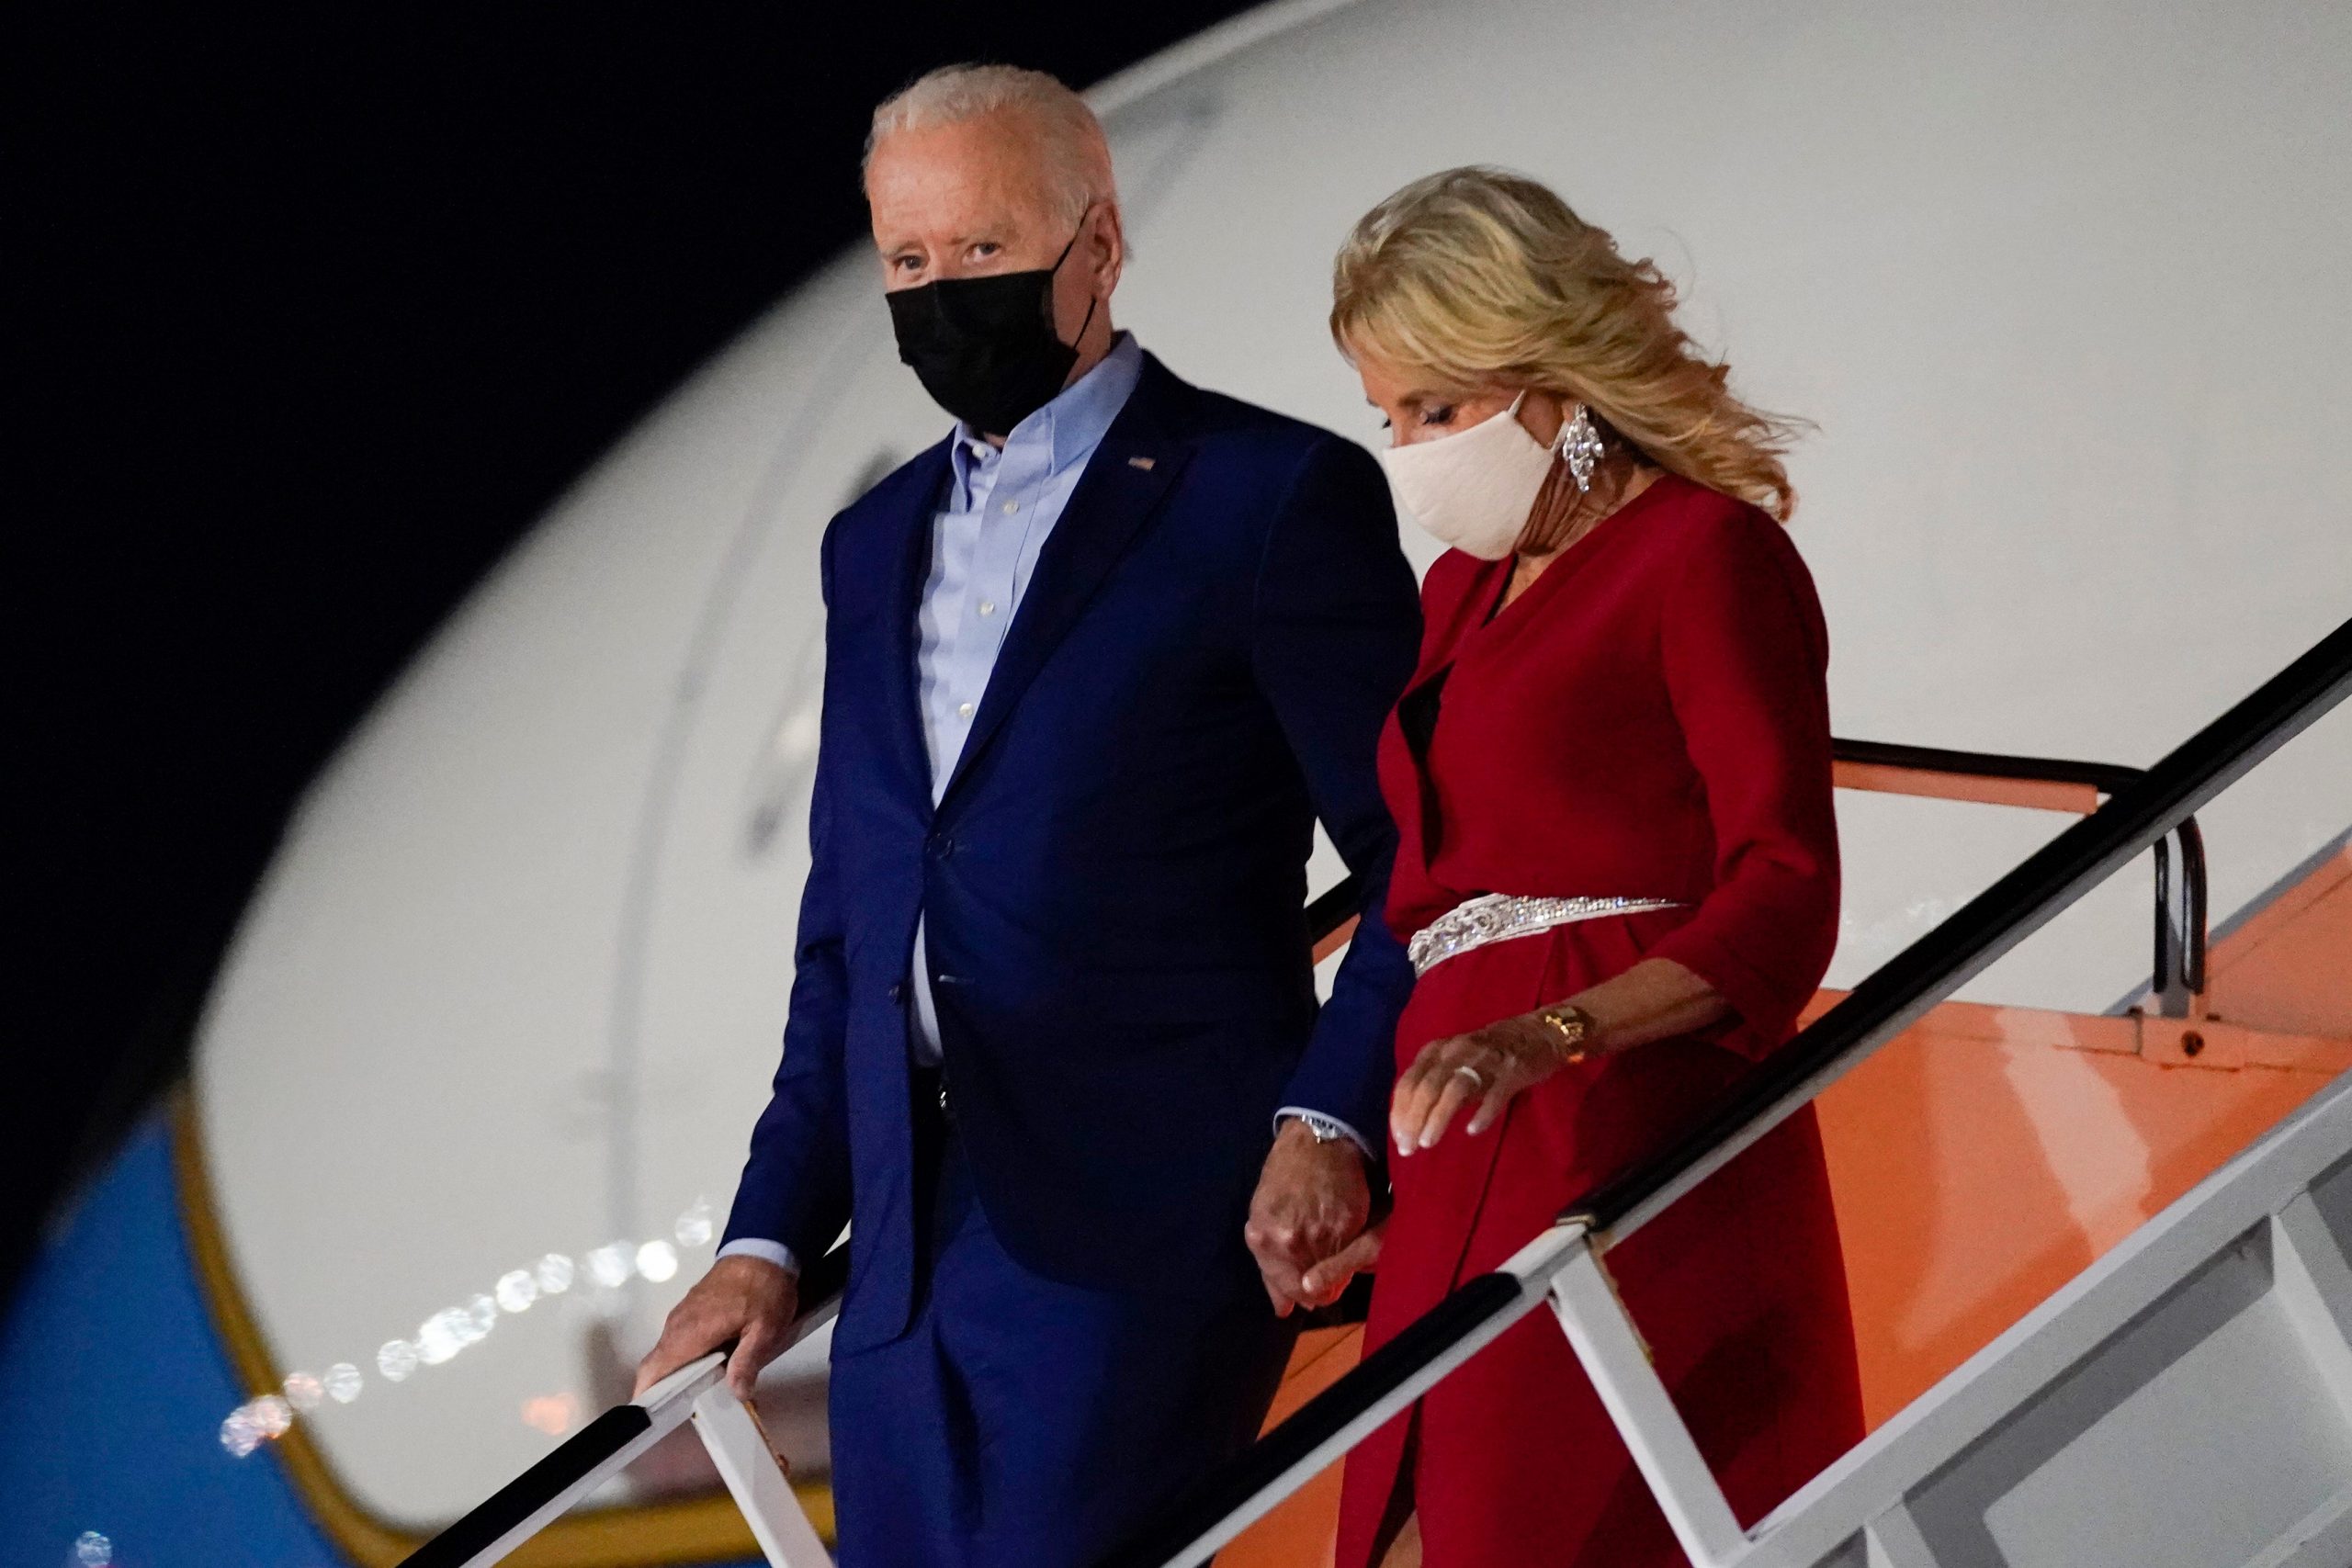 President Joe Biden holds first lady Dr. Jill Biden's hand as they exit Air Force One